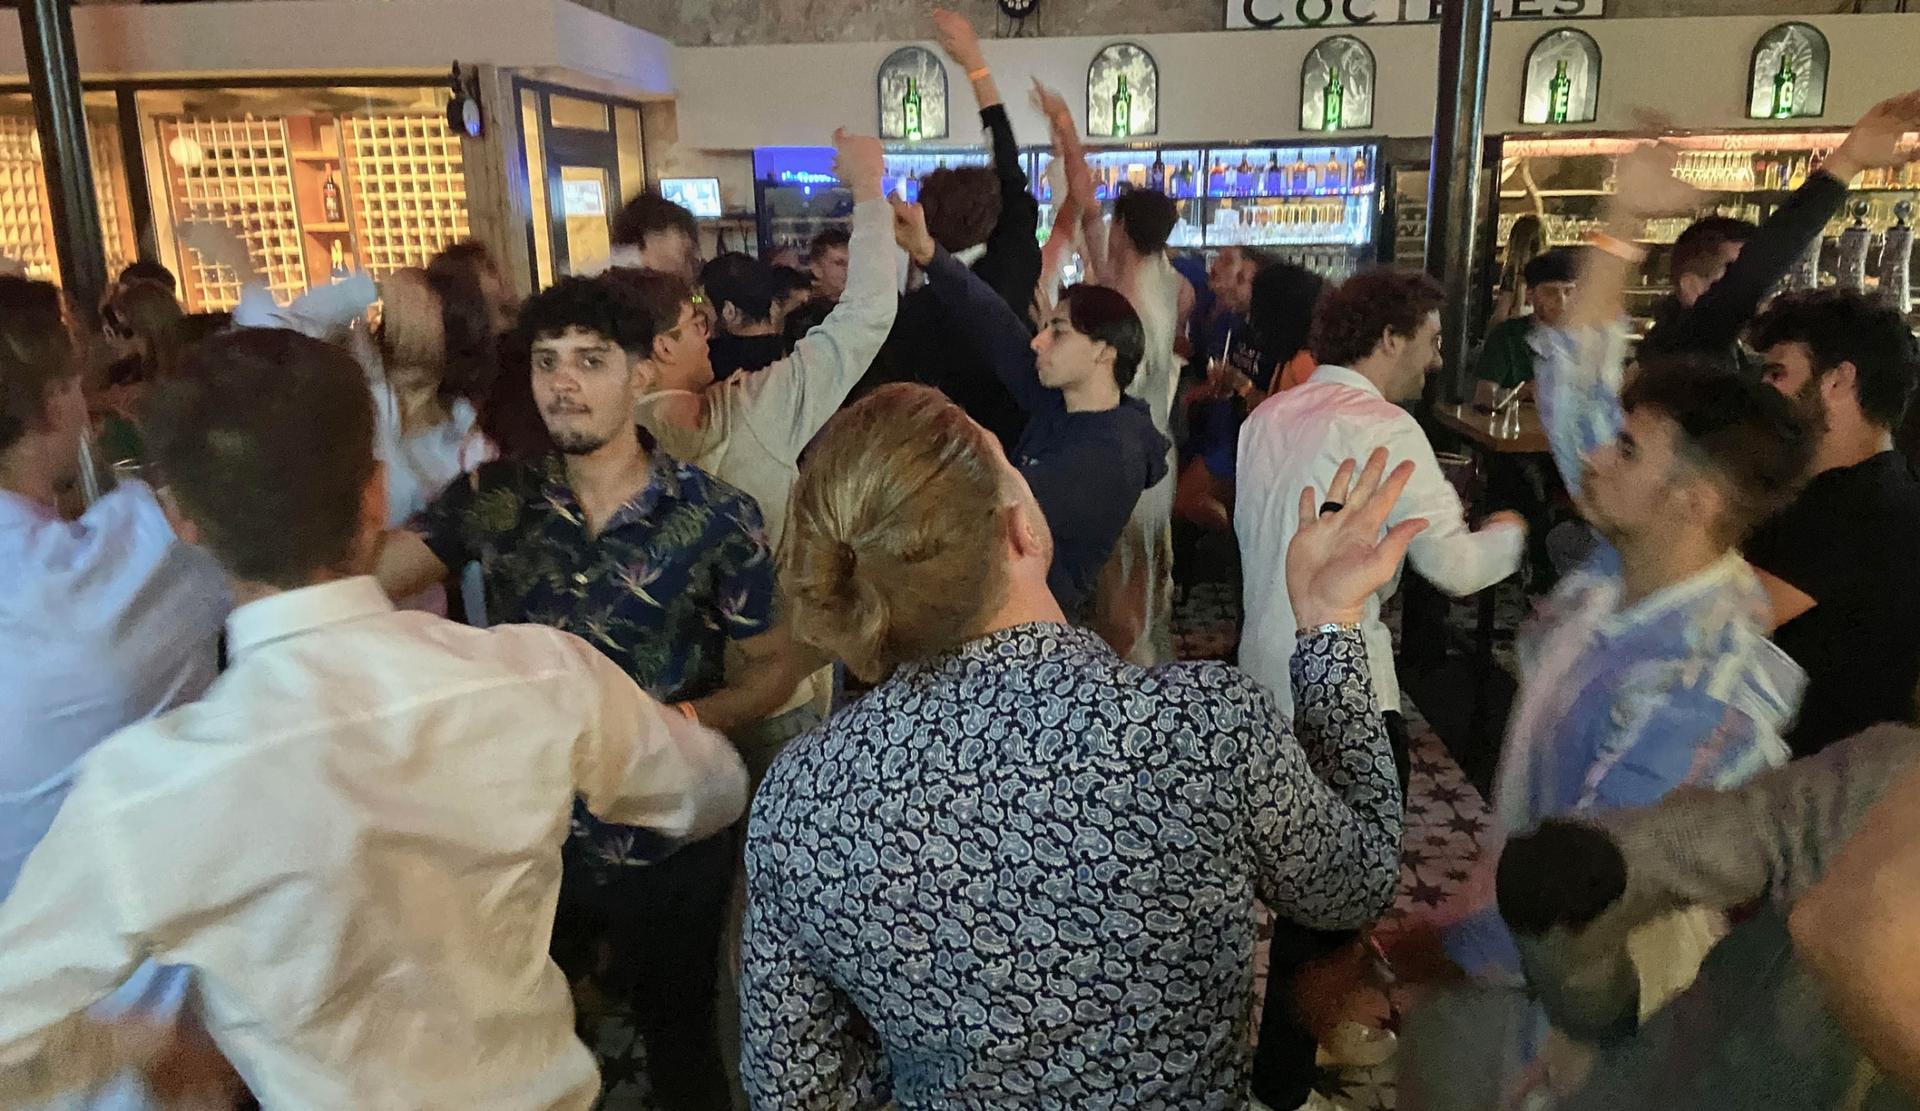 Teens in France couldn't go dancing for two years due to COVID-19. Now they're out in force. But the party's been dampened by people drugging drinks in attempts to exploit using "needle-spiking" and young people say they're frightened.